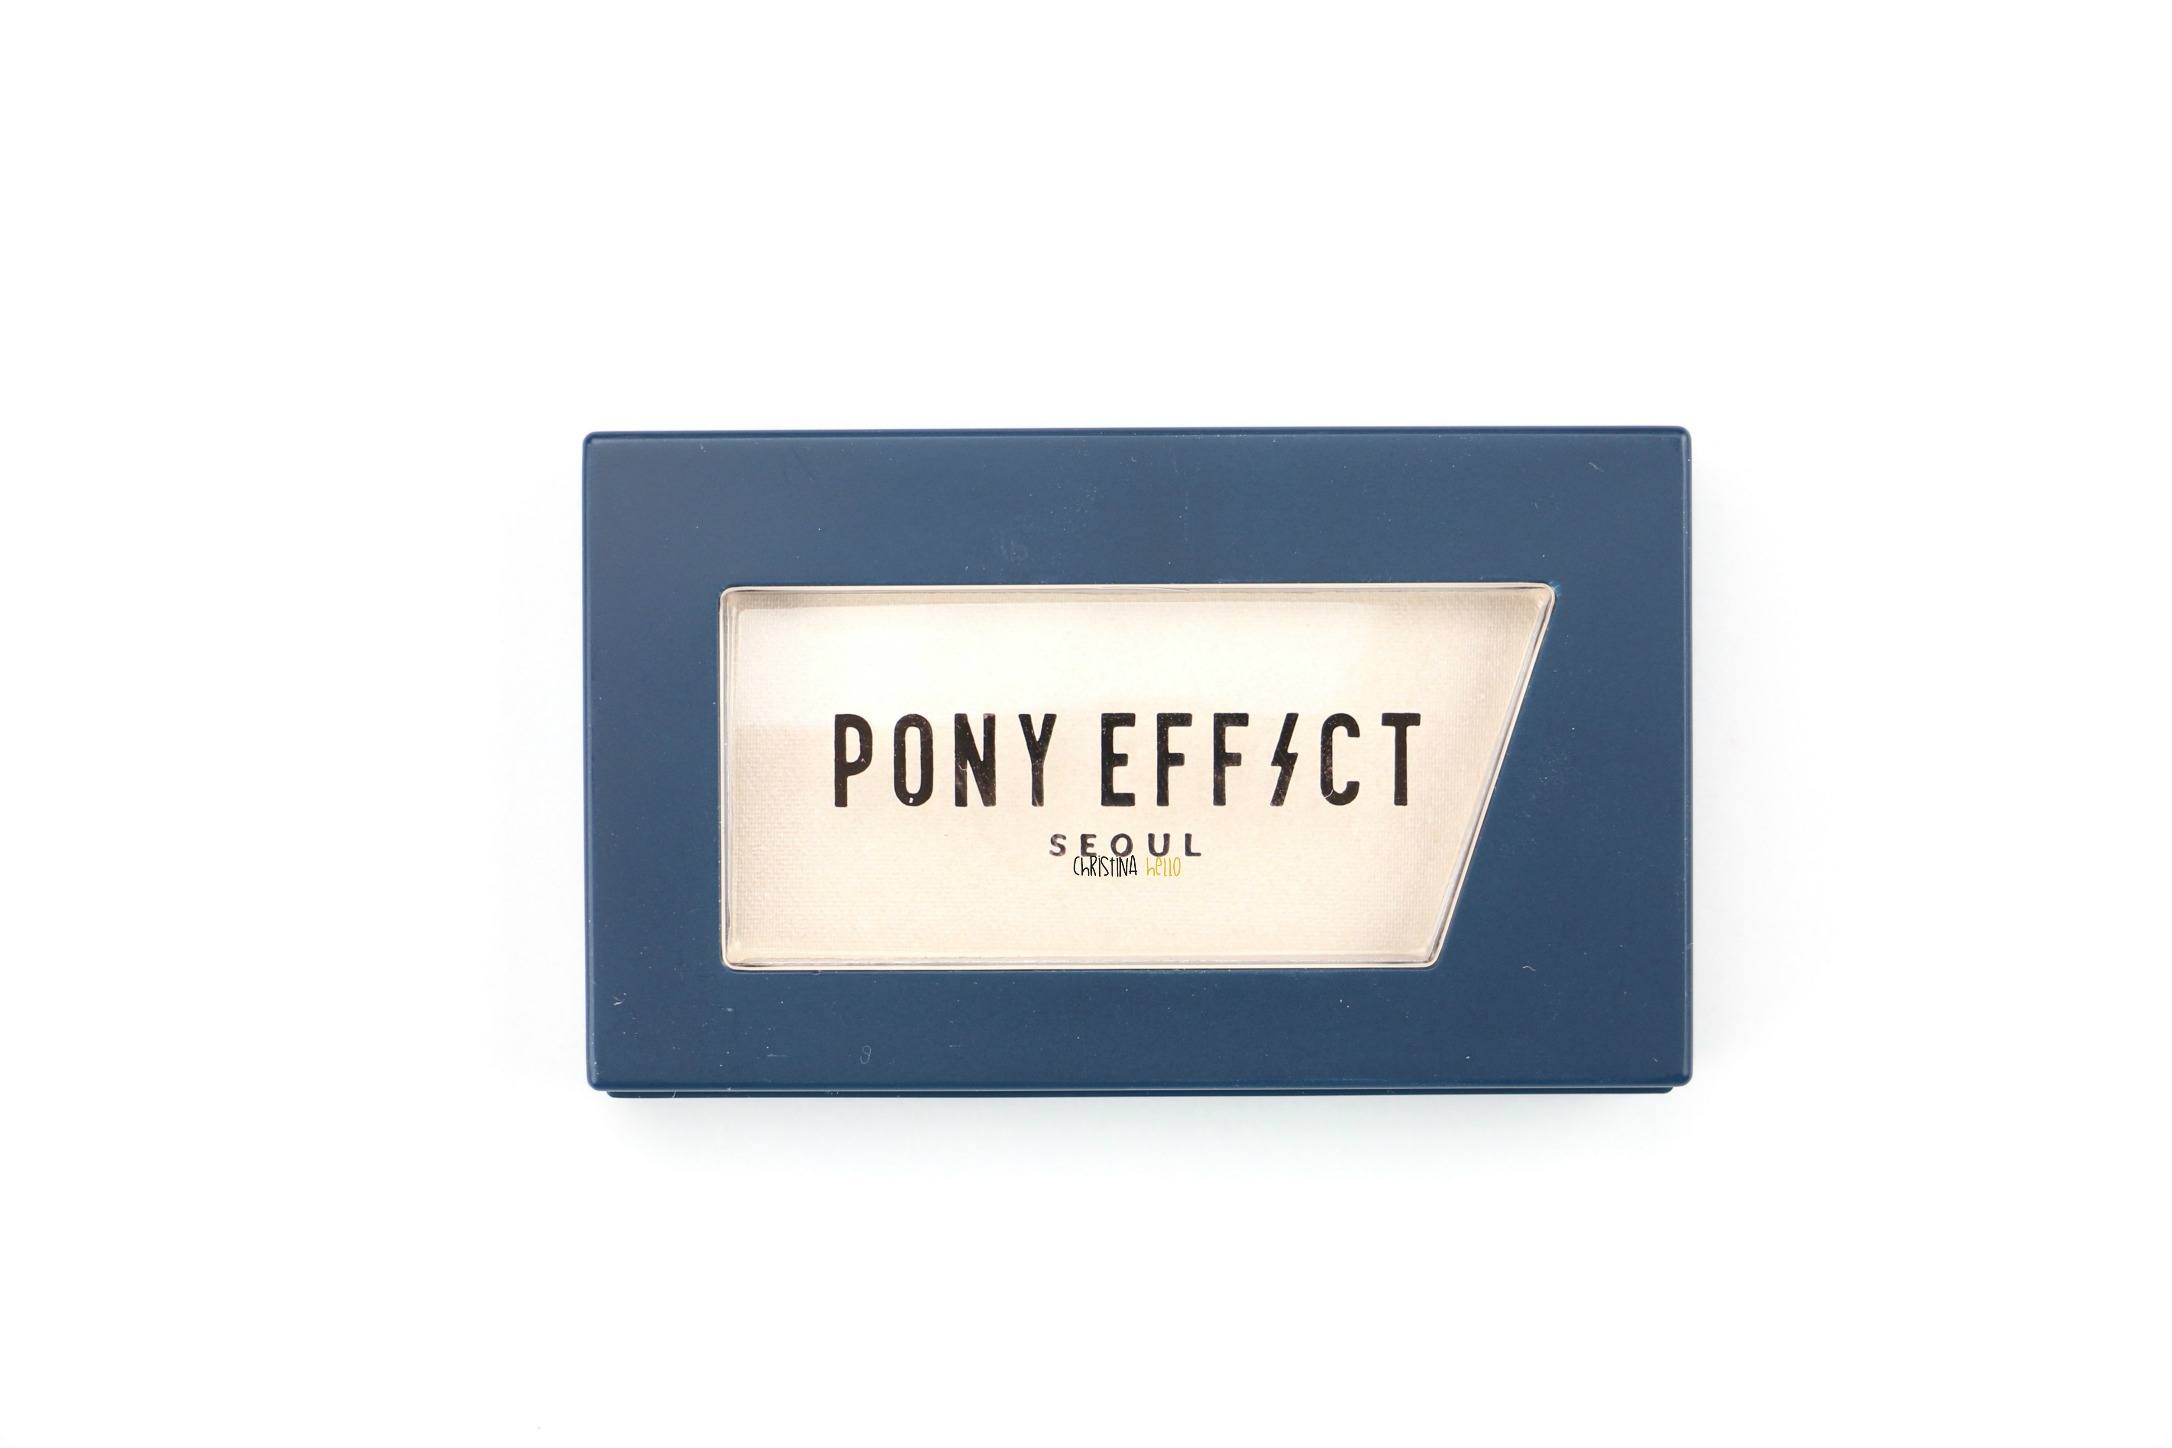 Pony effect highlighter review